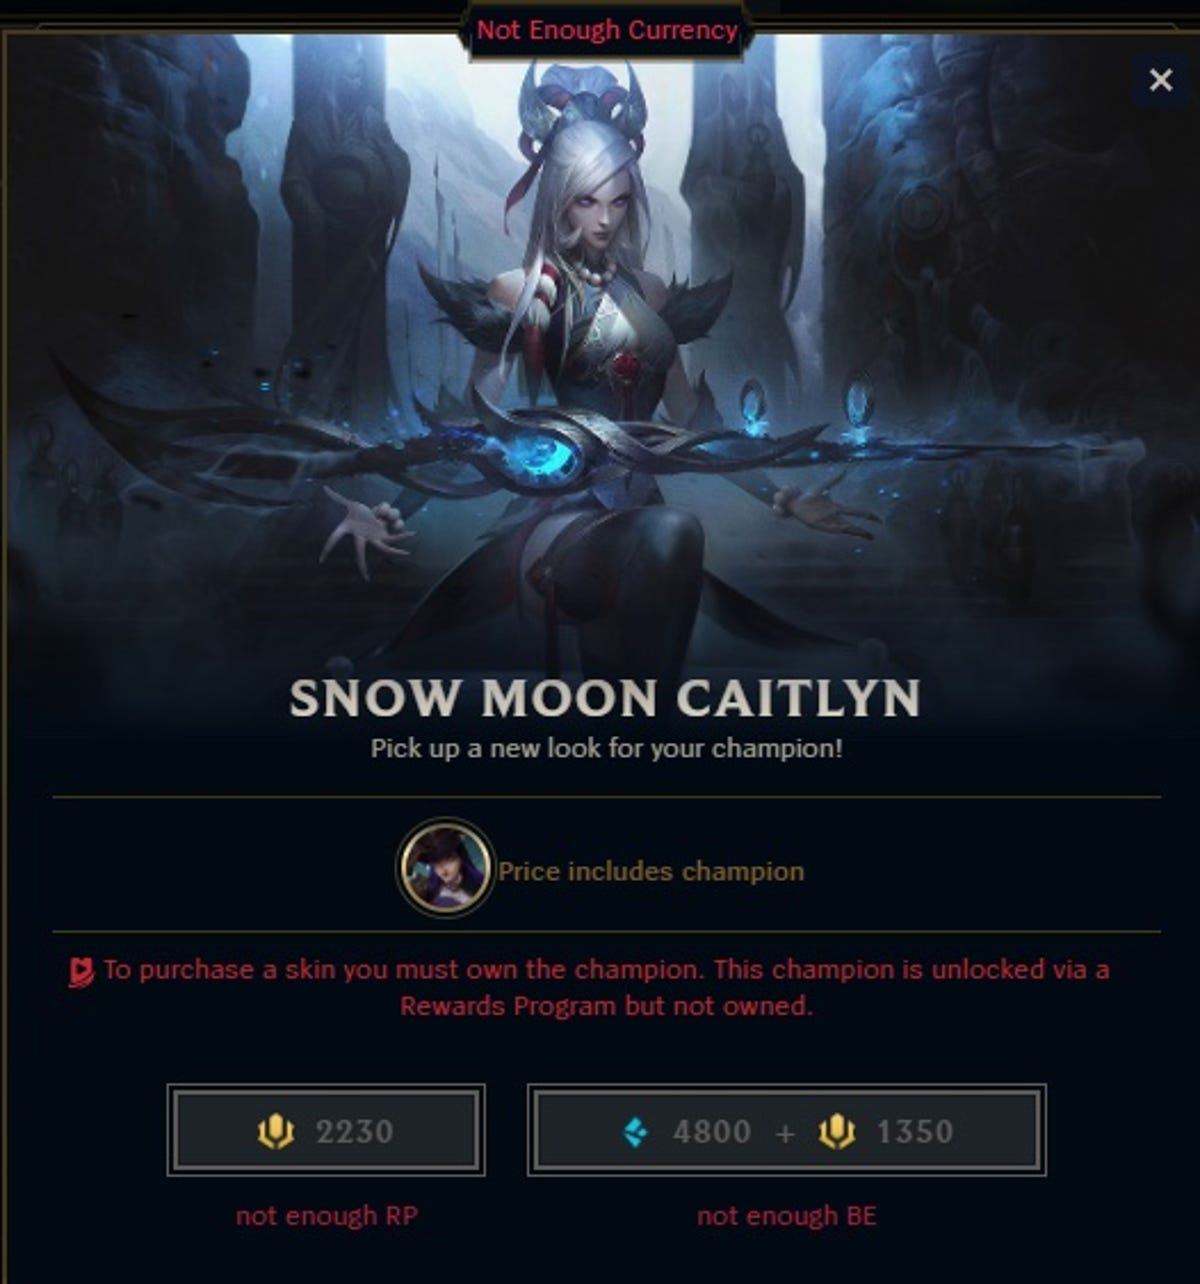 In-game notification stating the user does not own a champion